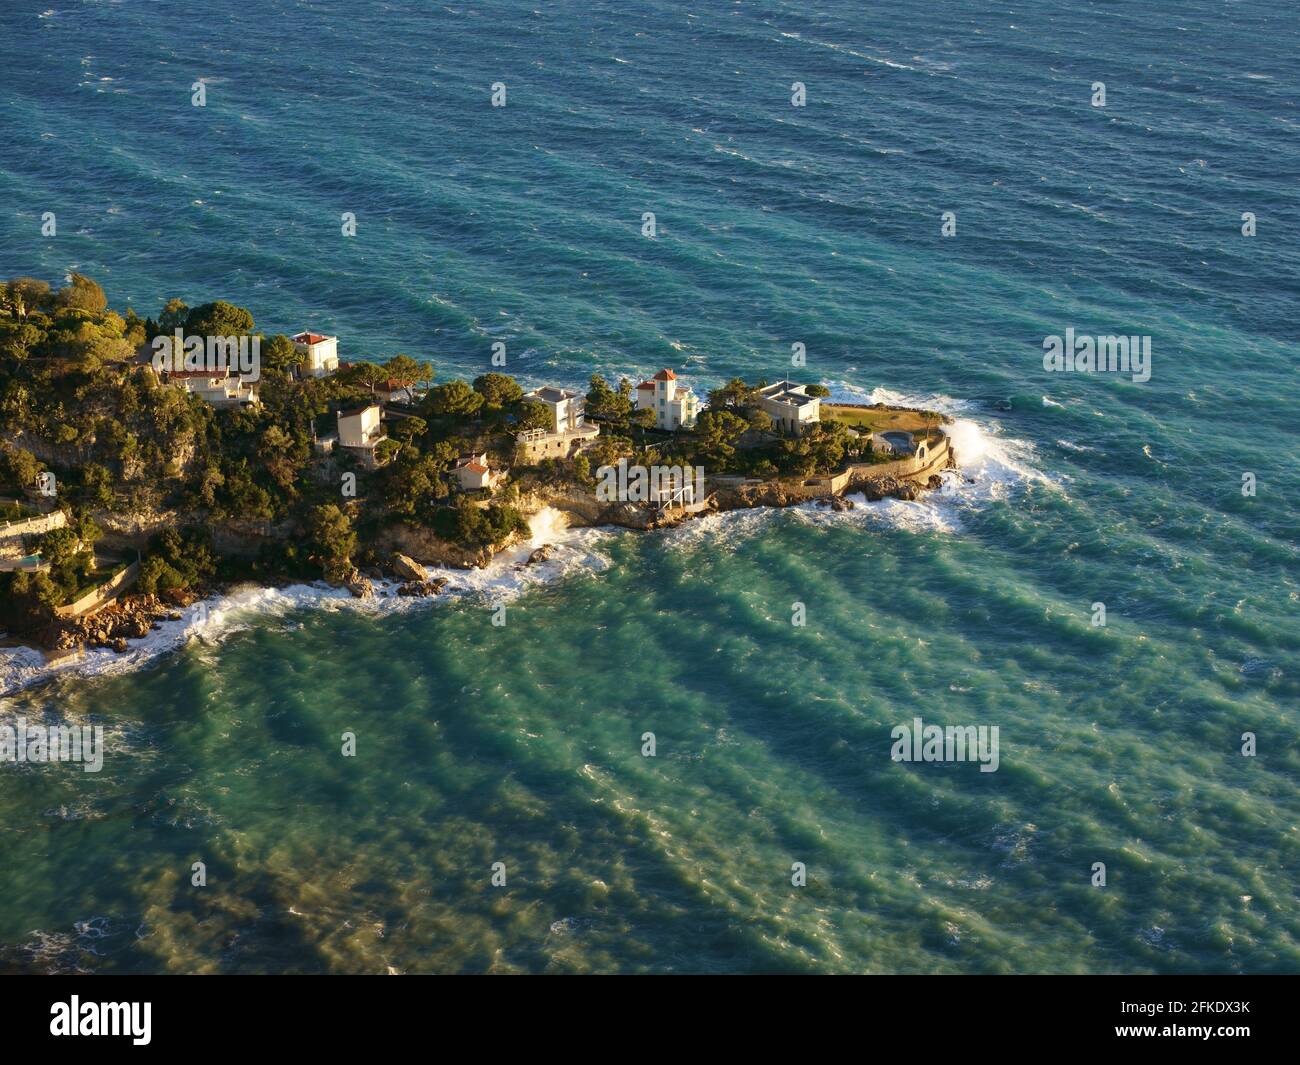 Low angle of the winter sunlight over the choppy Mediterranean Sea and the Luxurious villas of the Mala Promontory. Cap d'Ail, French Riviera, France. Stock Photo